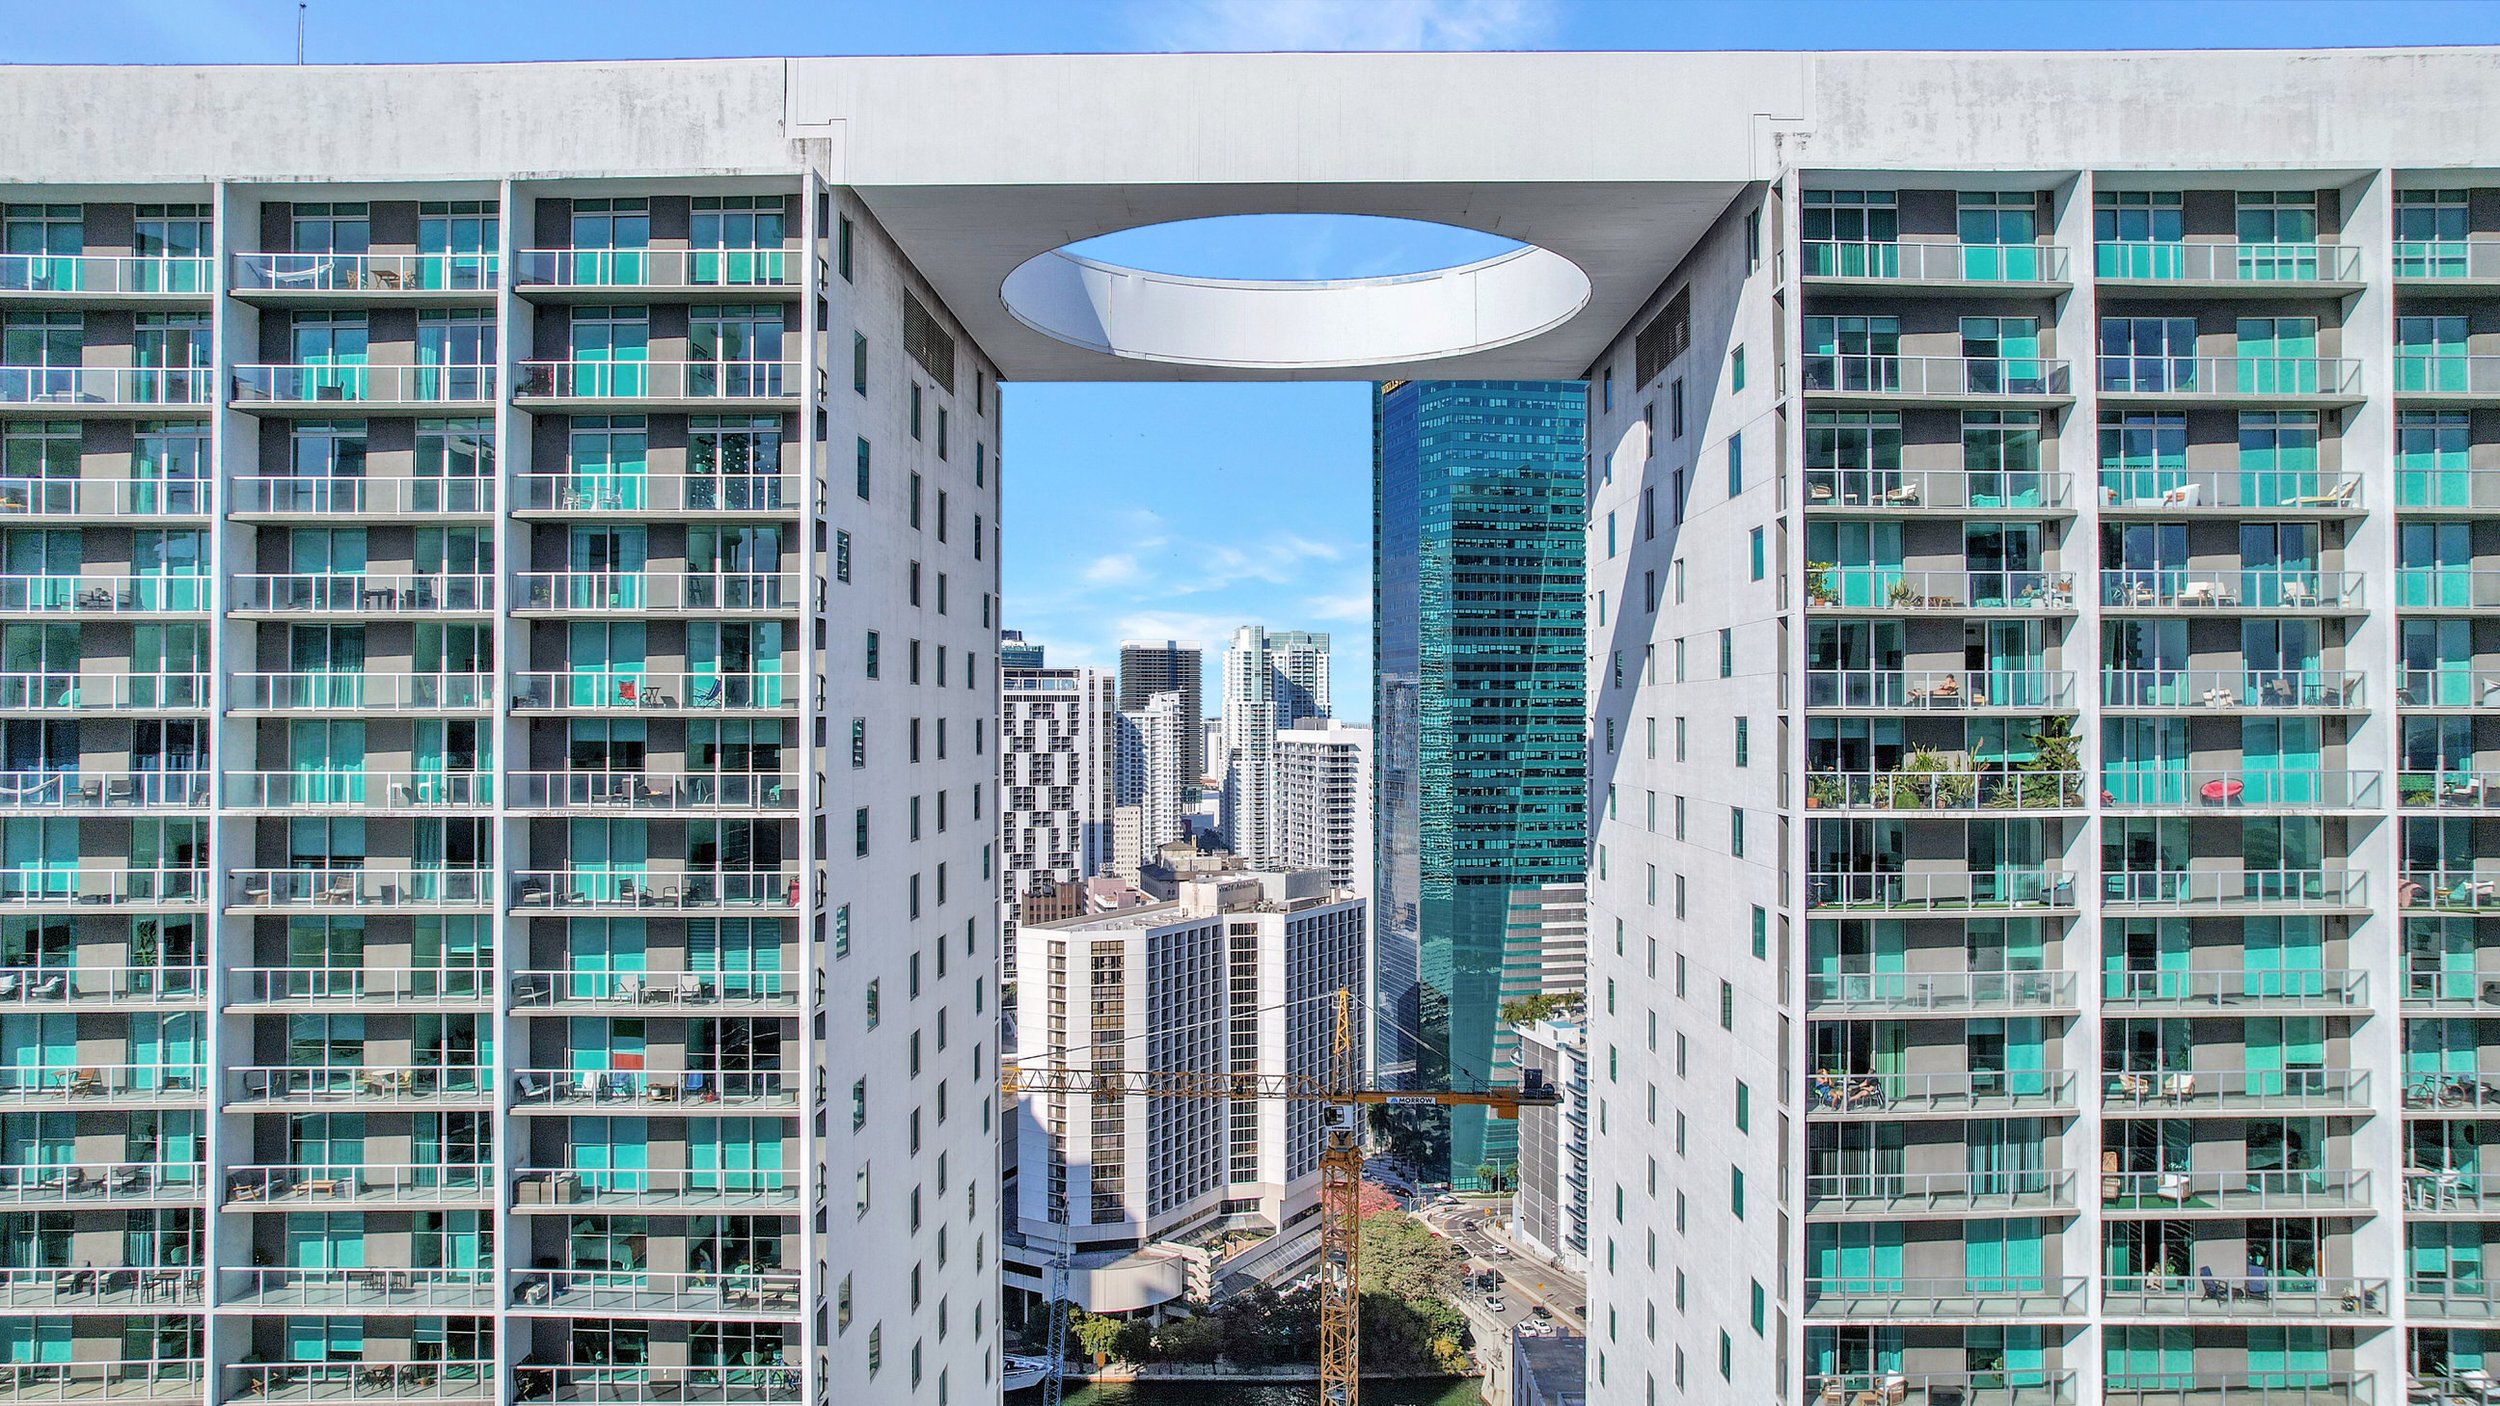 Check Out This Two-Bedroom Condo For Under $900K In Brickell 55.jpg